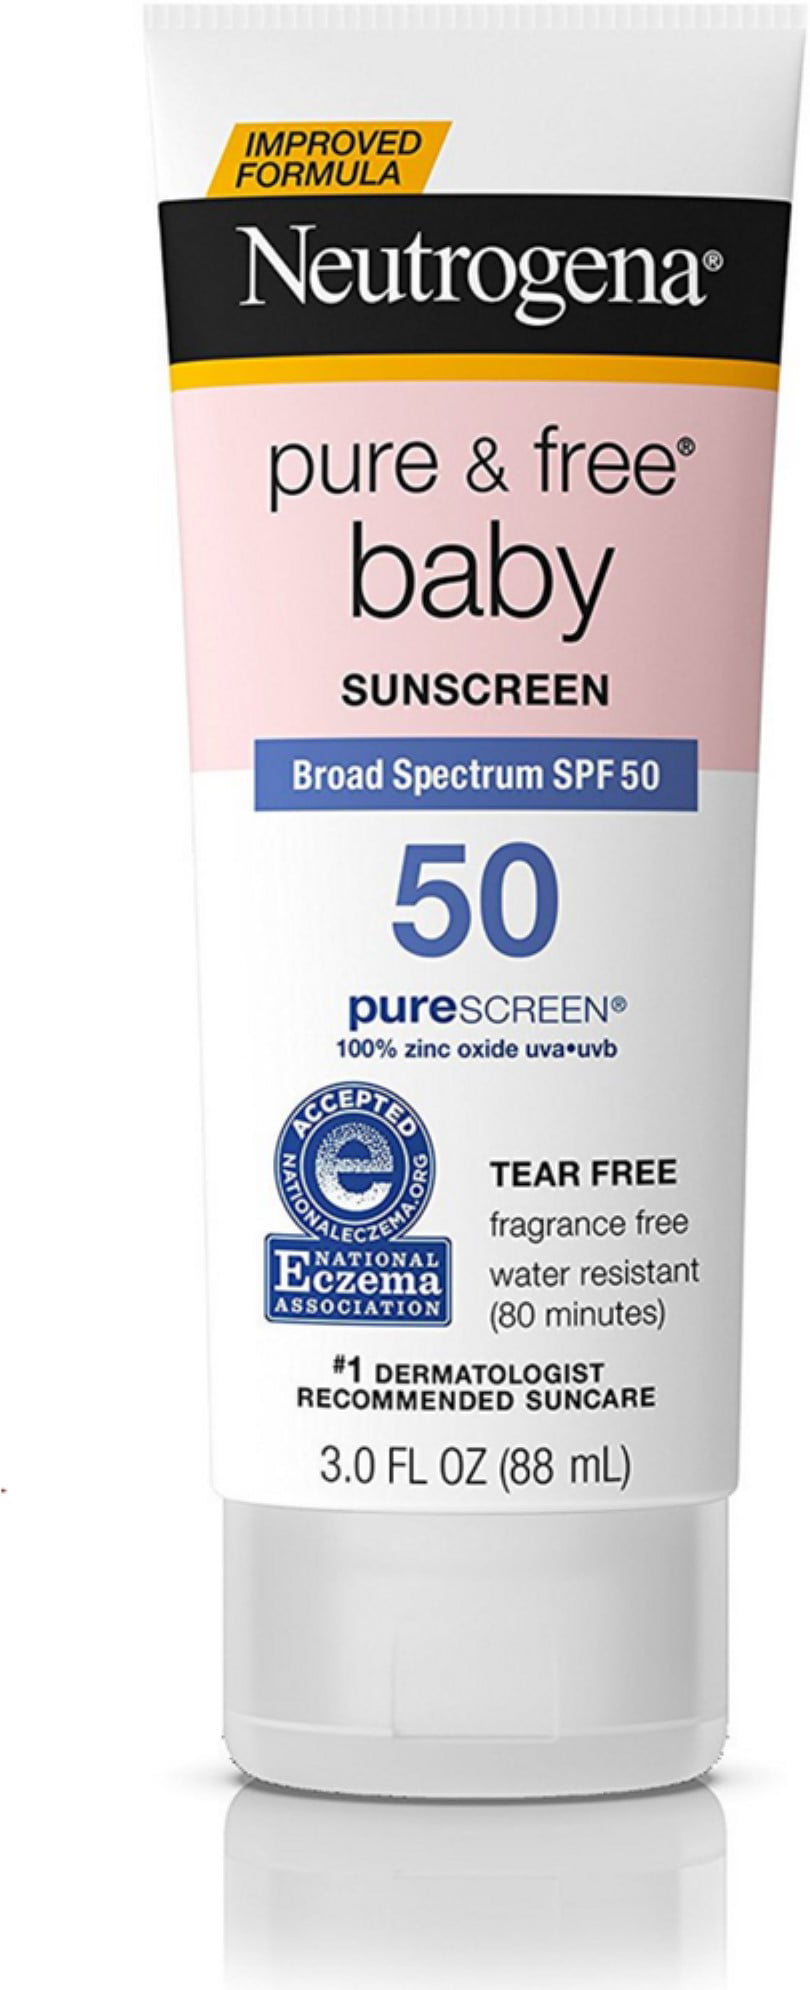 pure & free baby sunscreen lotion broad spectrum spf 50